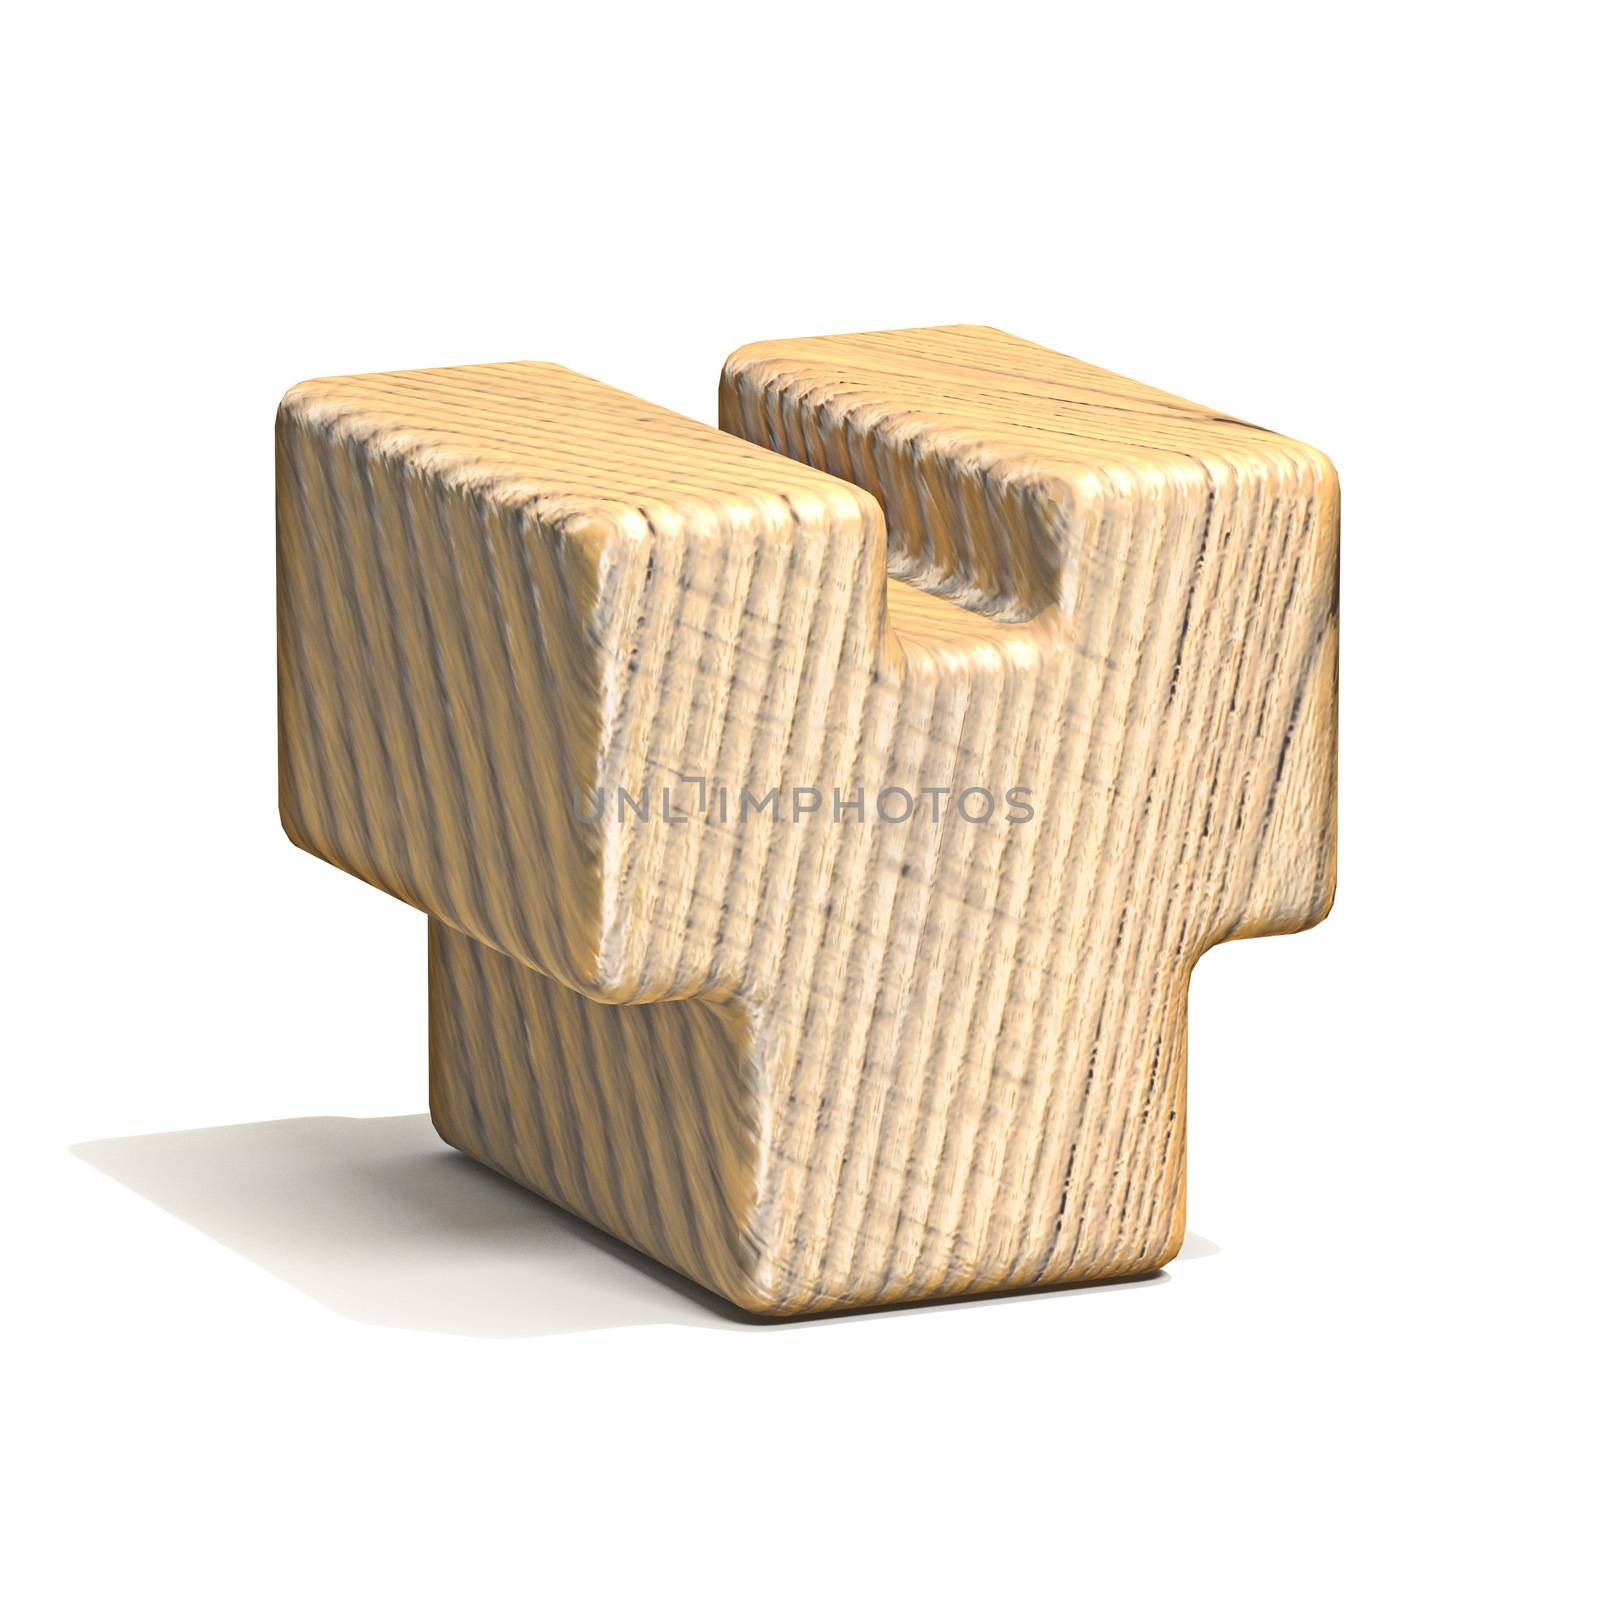 Solid wooden cube font Letter Y 3D render illustration isolated on white background